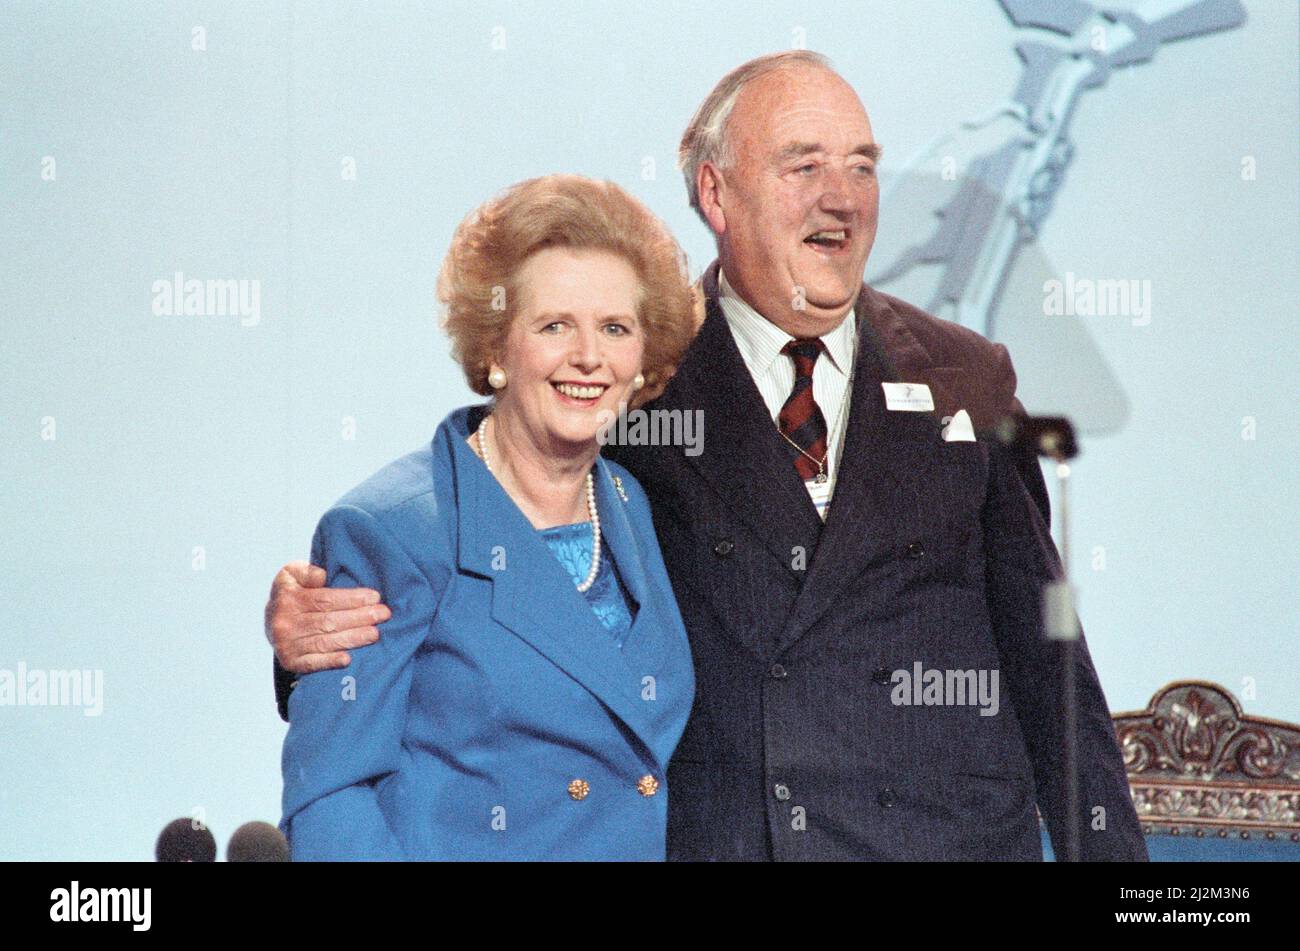 The Conservative Party Conference, Blackpool. Prime Minister Margaret Thatcher with Willie Whitelaw. October 1989. Stock Photo